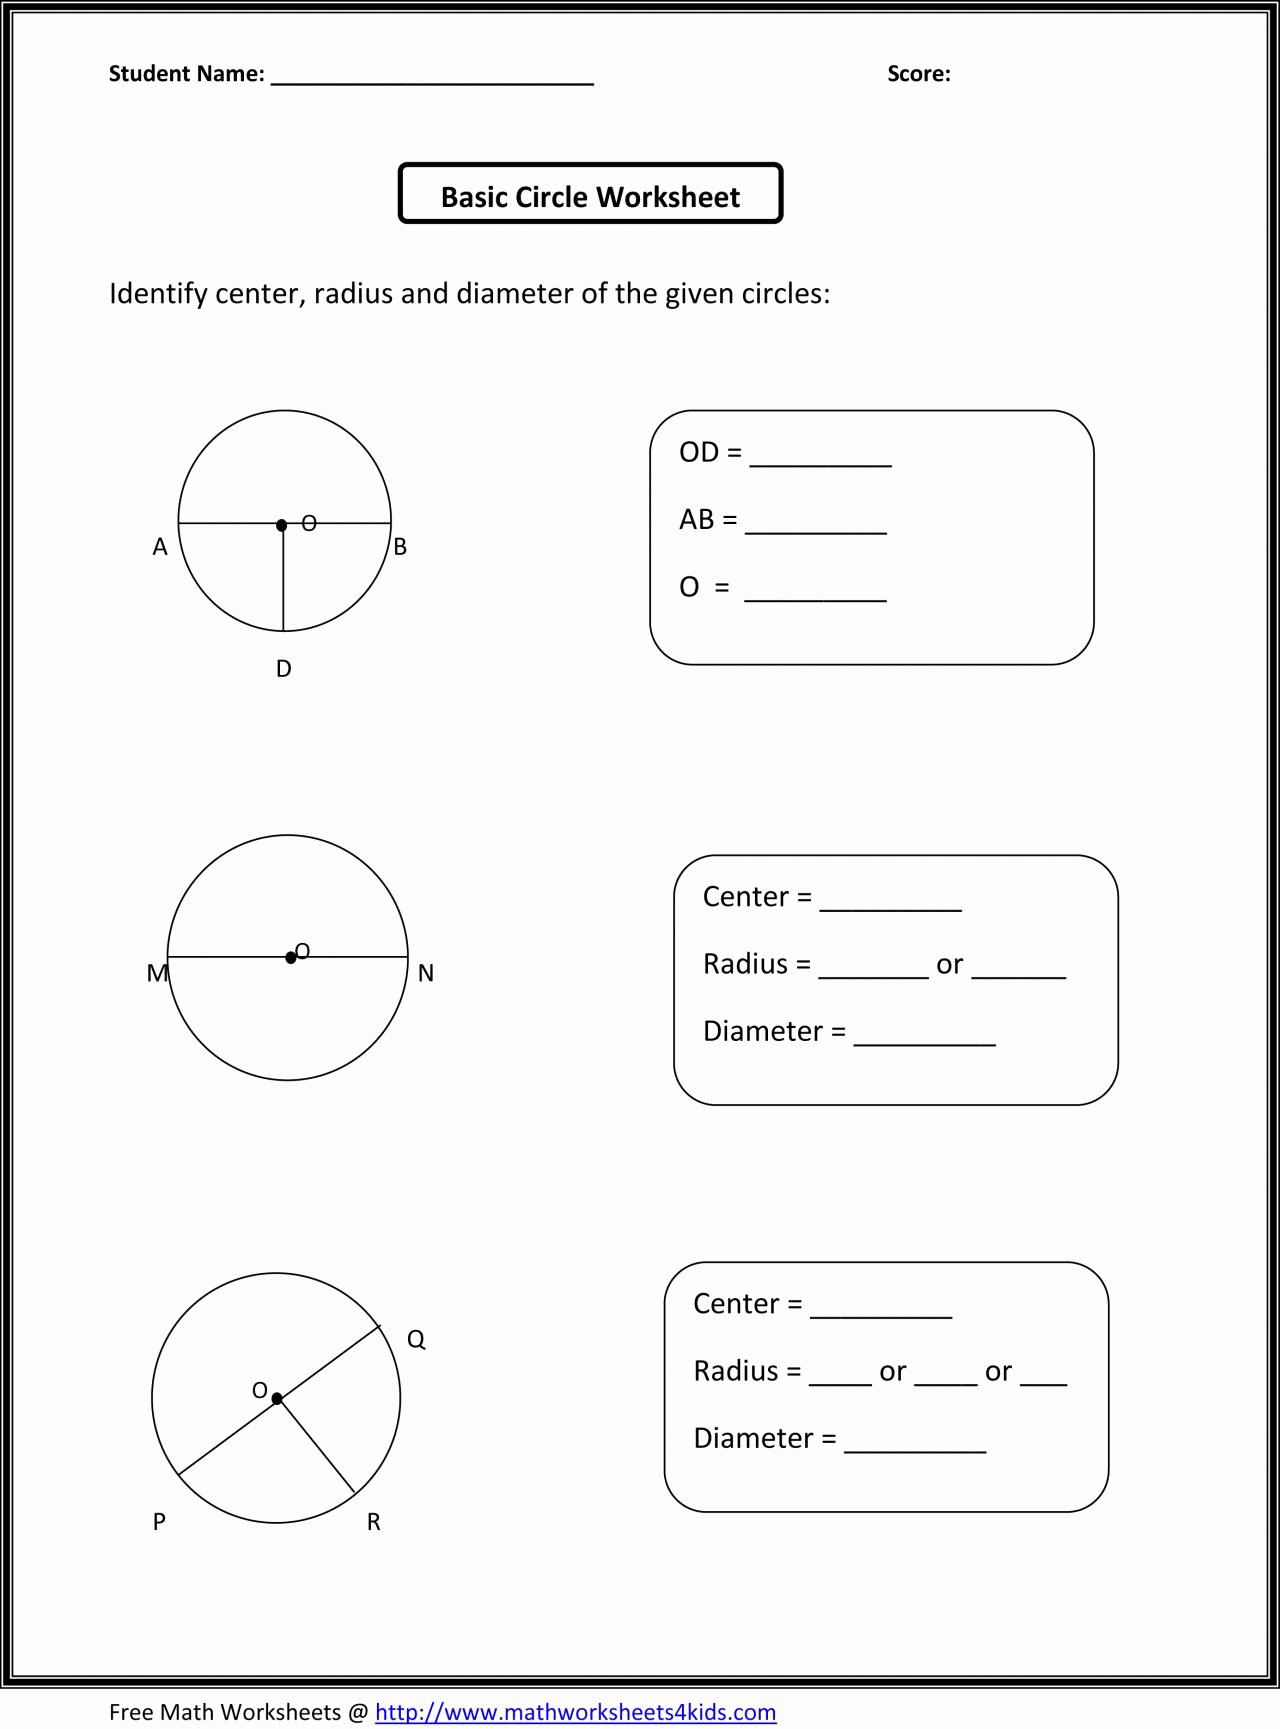 Line Plots with Fractions Worksheet Fresh Line Plot with Fractions Worksheets Worksheet Mogenk